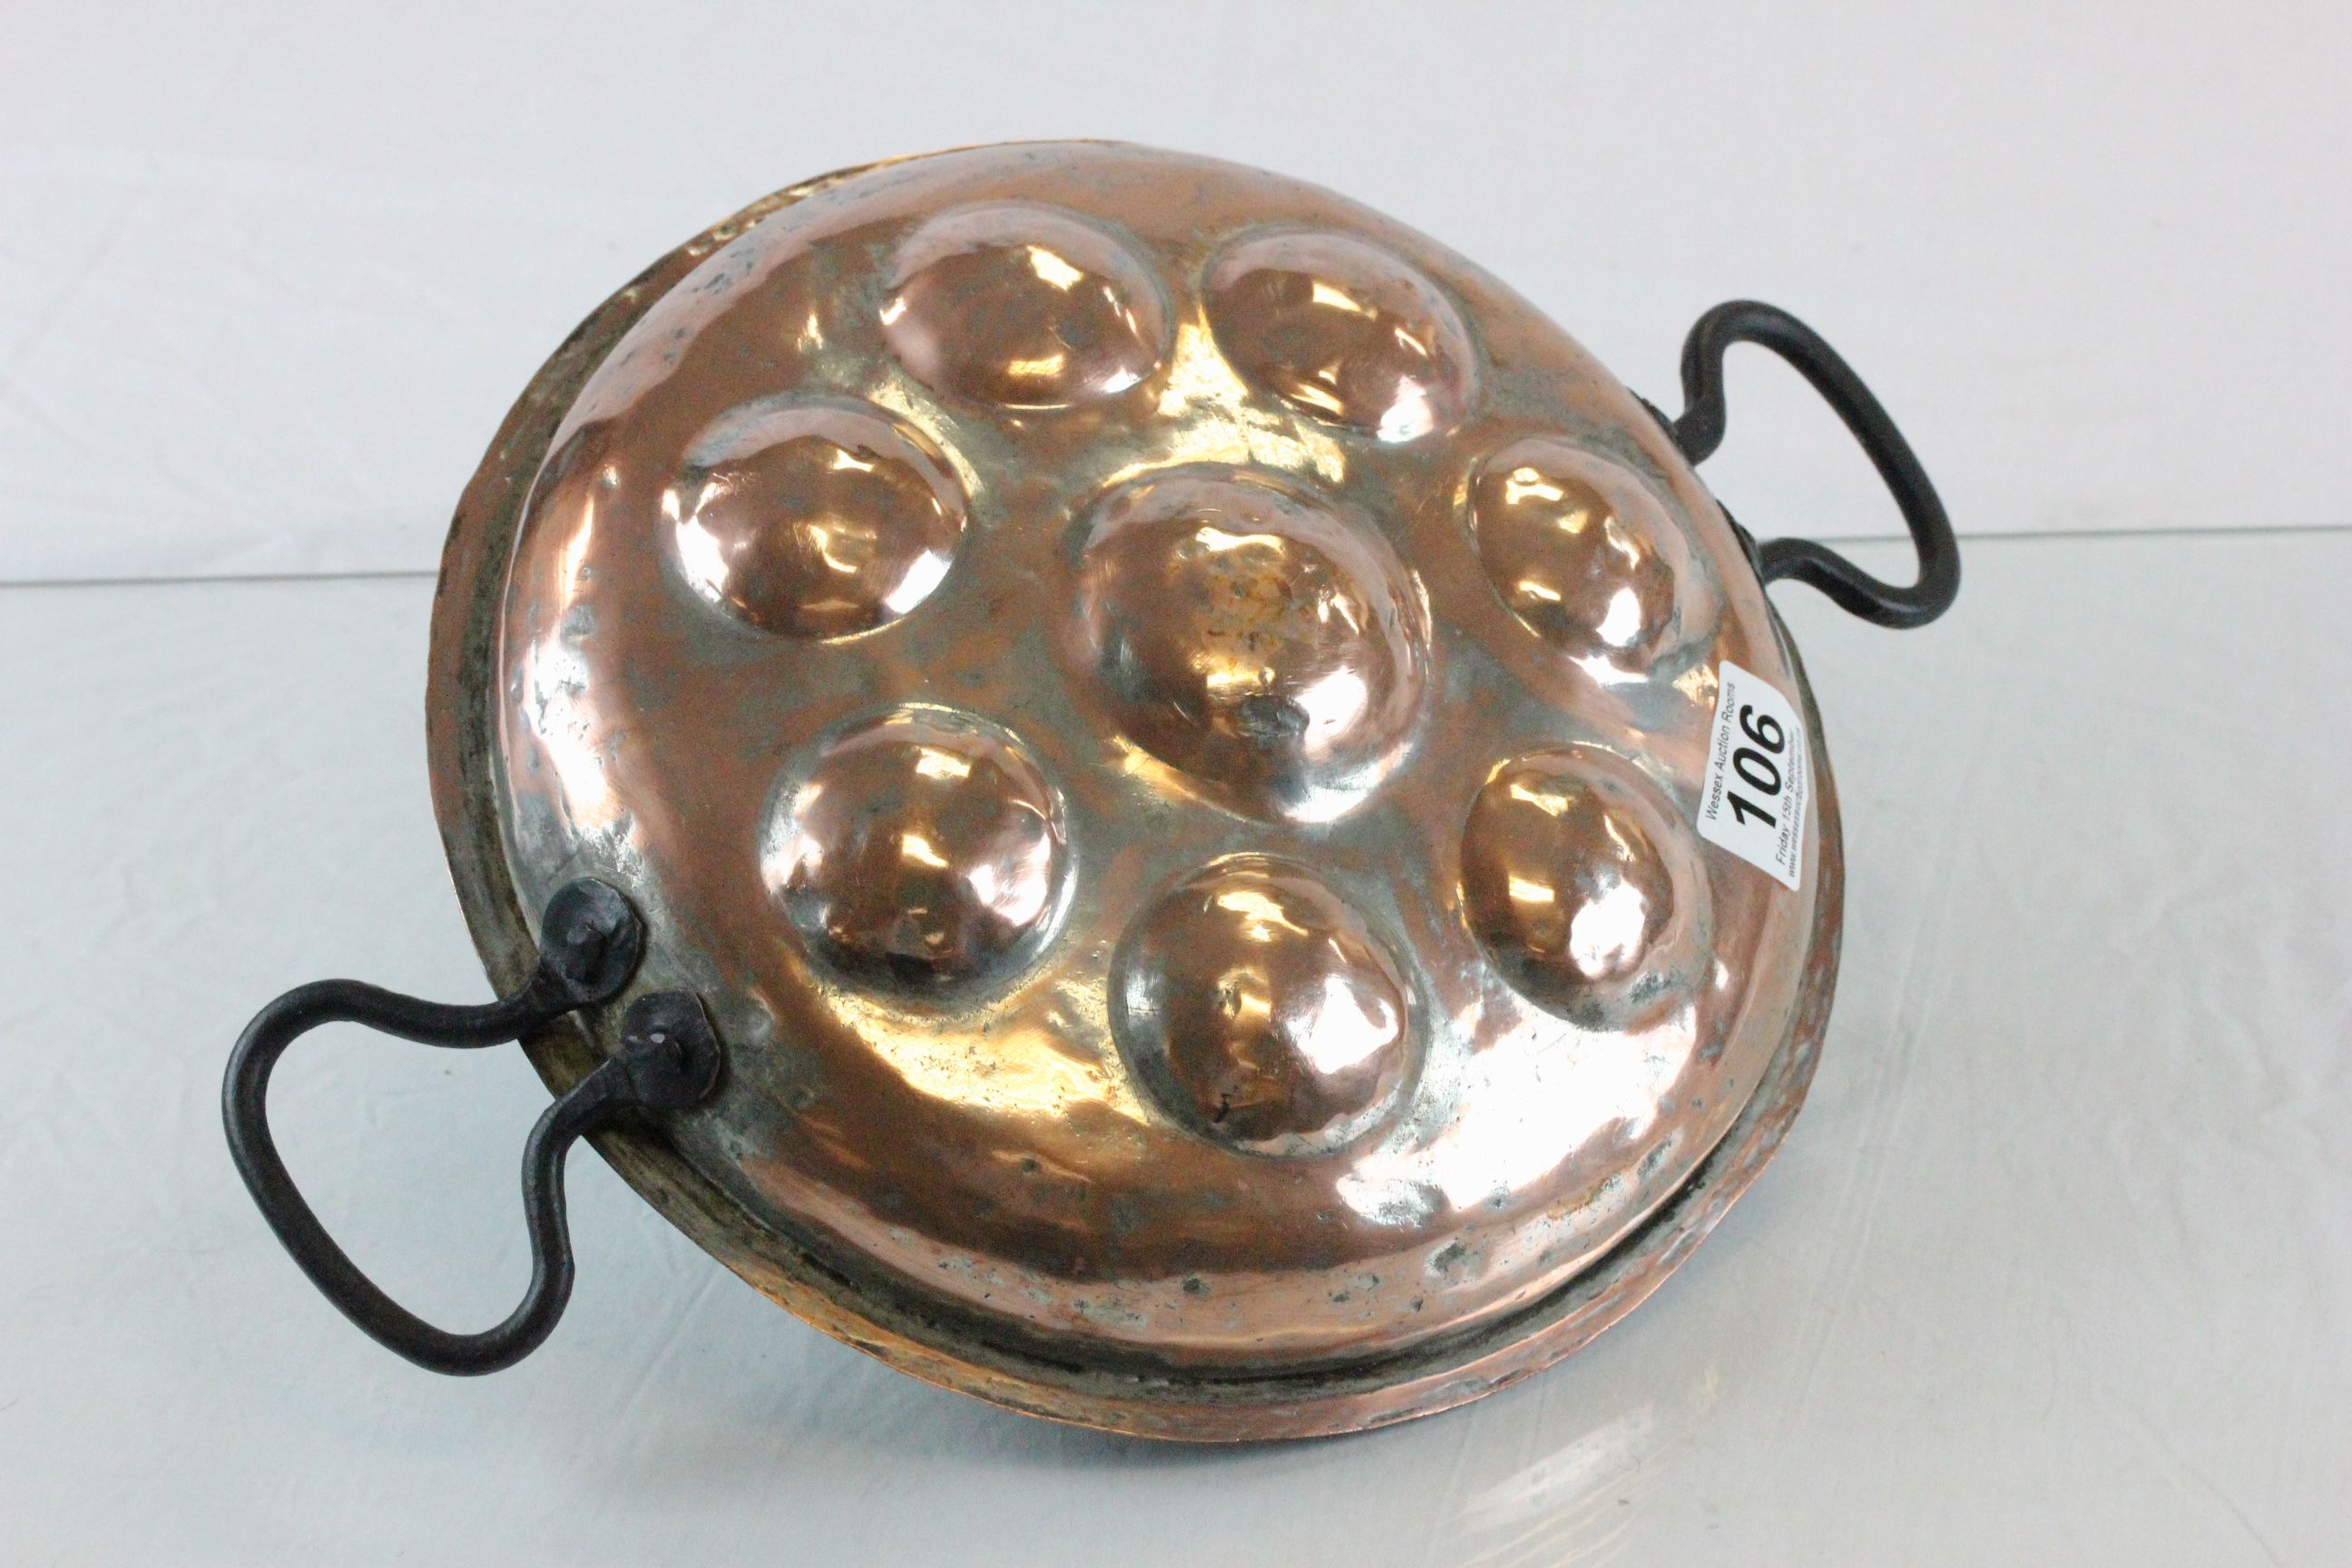 Vintage French Coppered Hanging Escargot Pan - Image 2 of 2